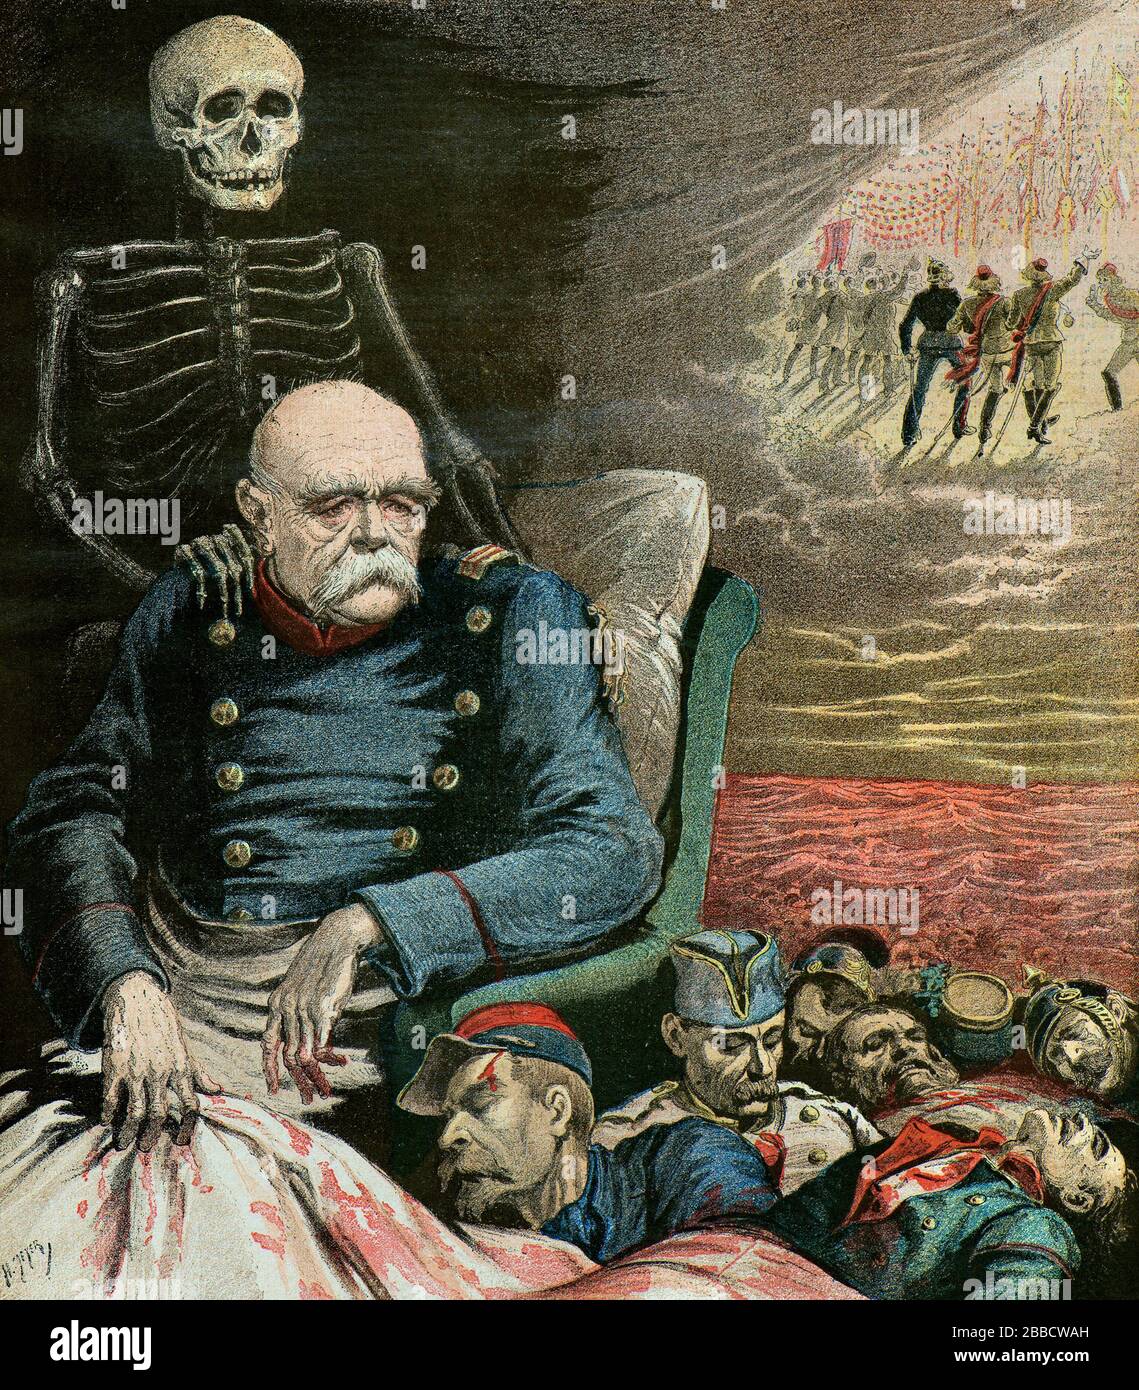 Meyer Henri ( 1841 - 1899 ) - Caricature portrait of Otto Von Bismarck, as he approaches death he contemplates the corpses of French soldiers - Private Collection Stock Photo